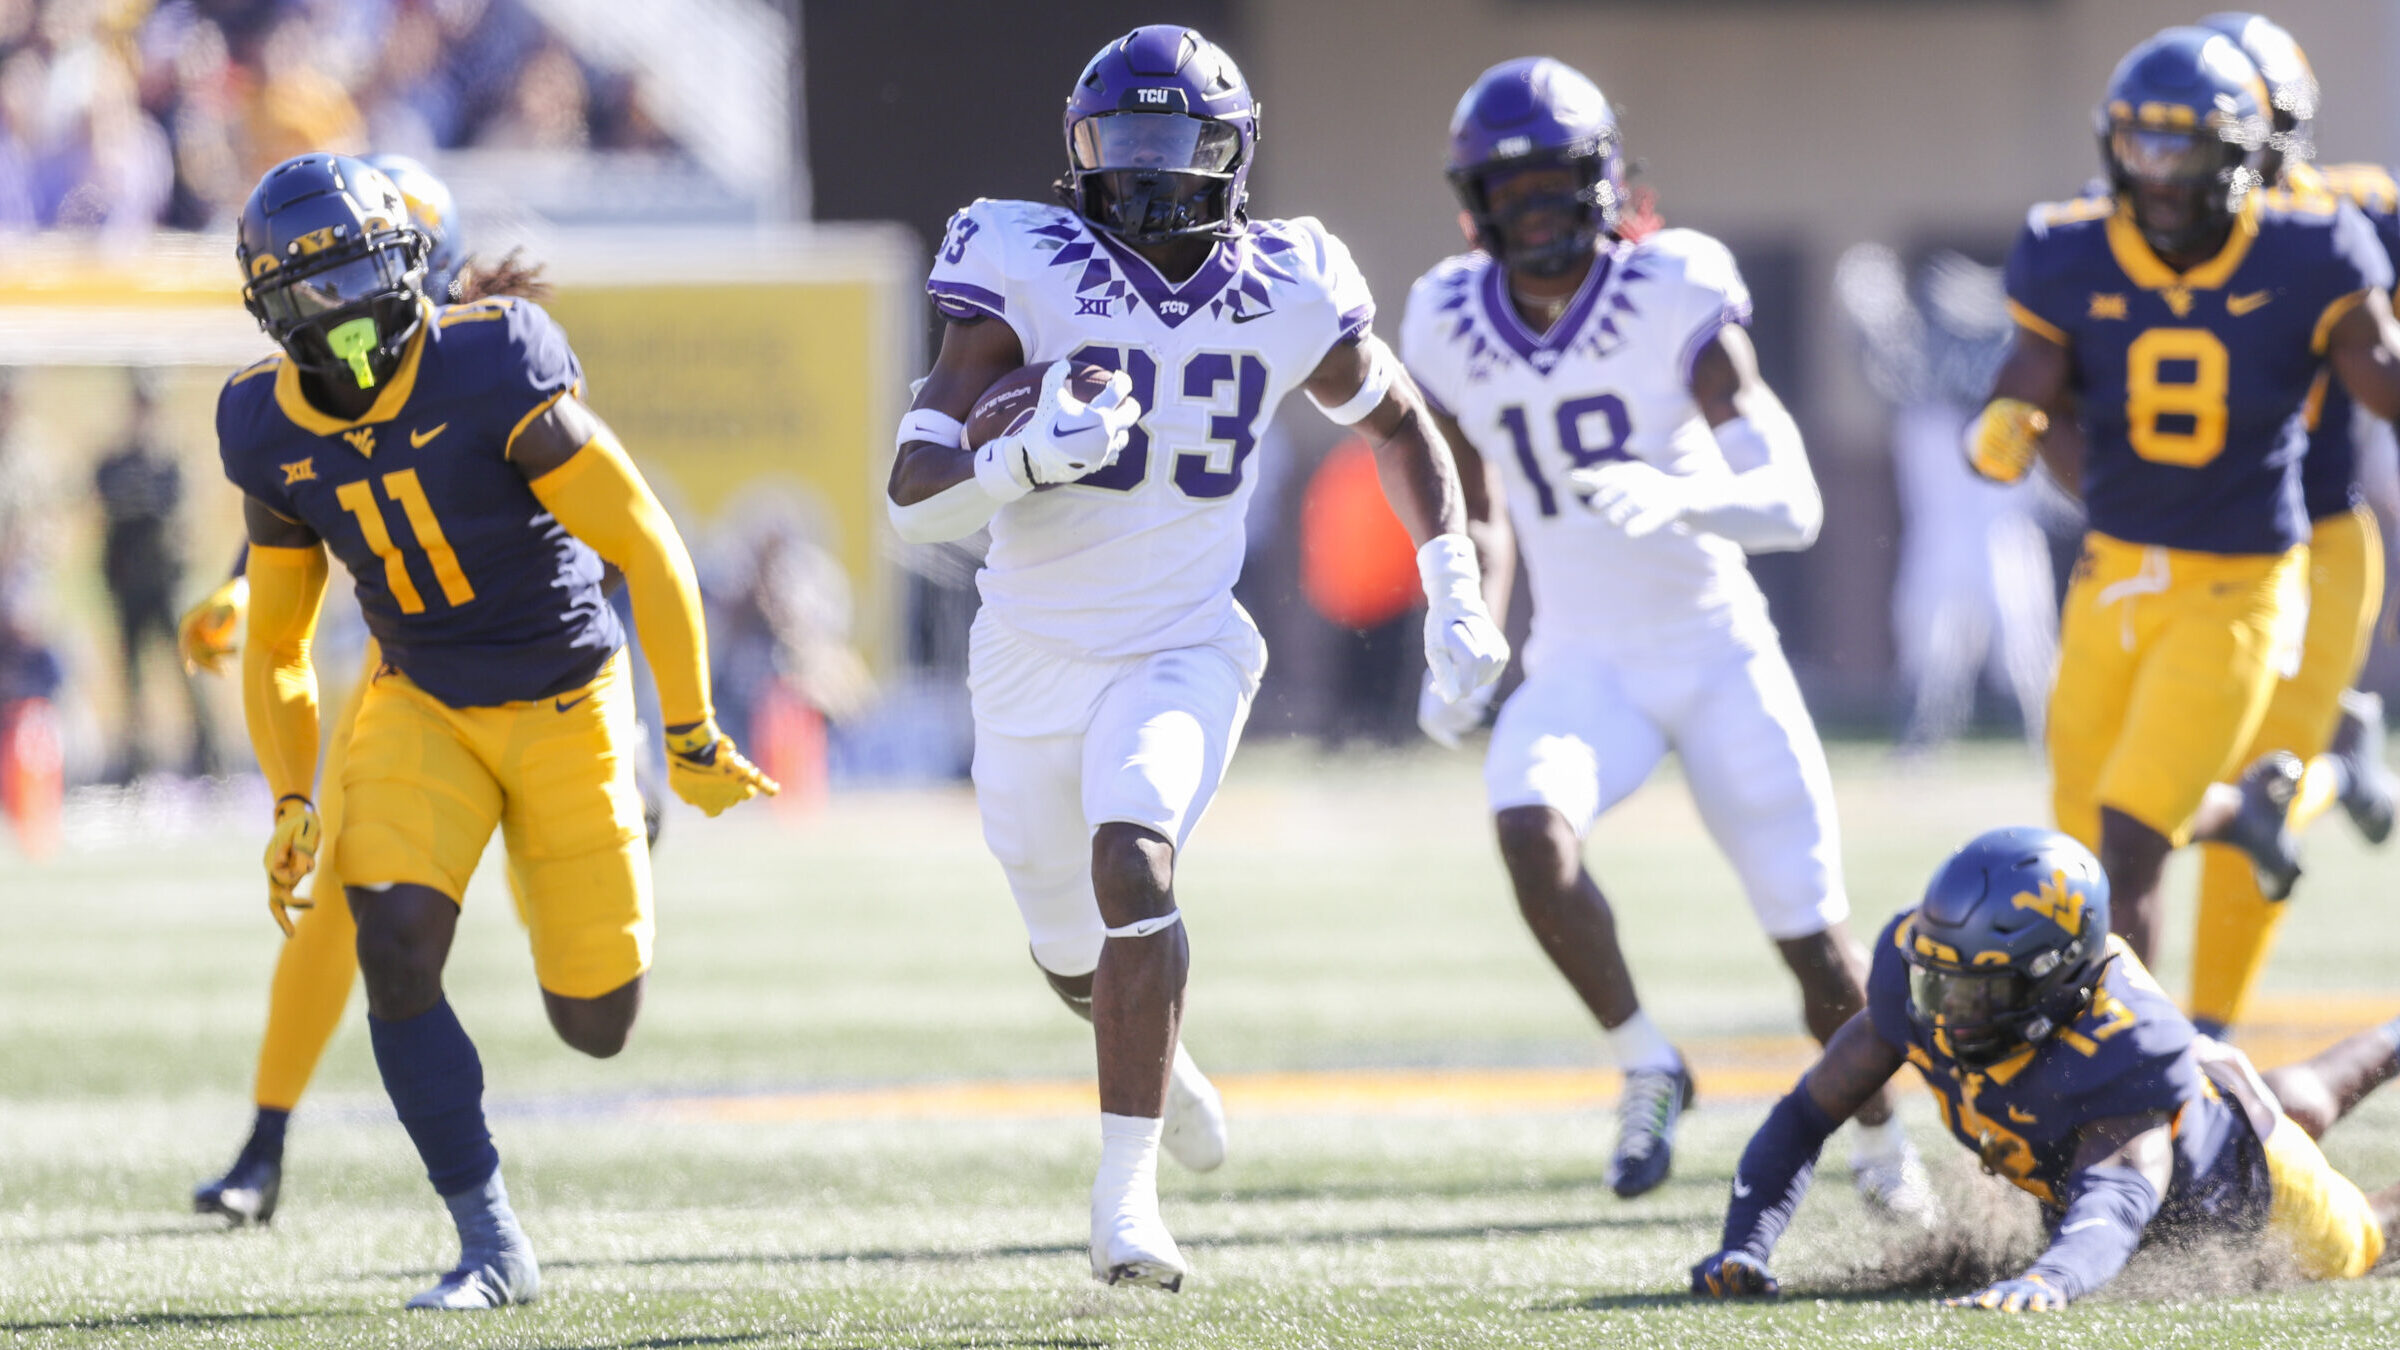 2023 NFL Draft: Round 3-4 Running Back Prospects Worth Monitoring